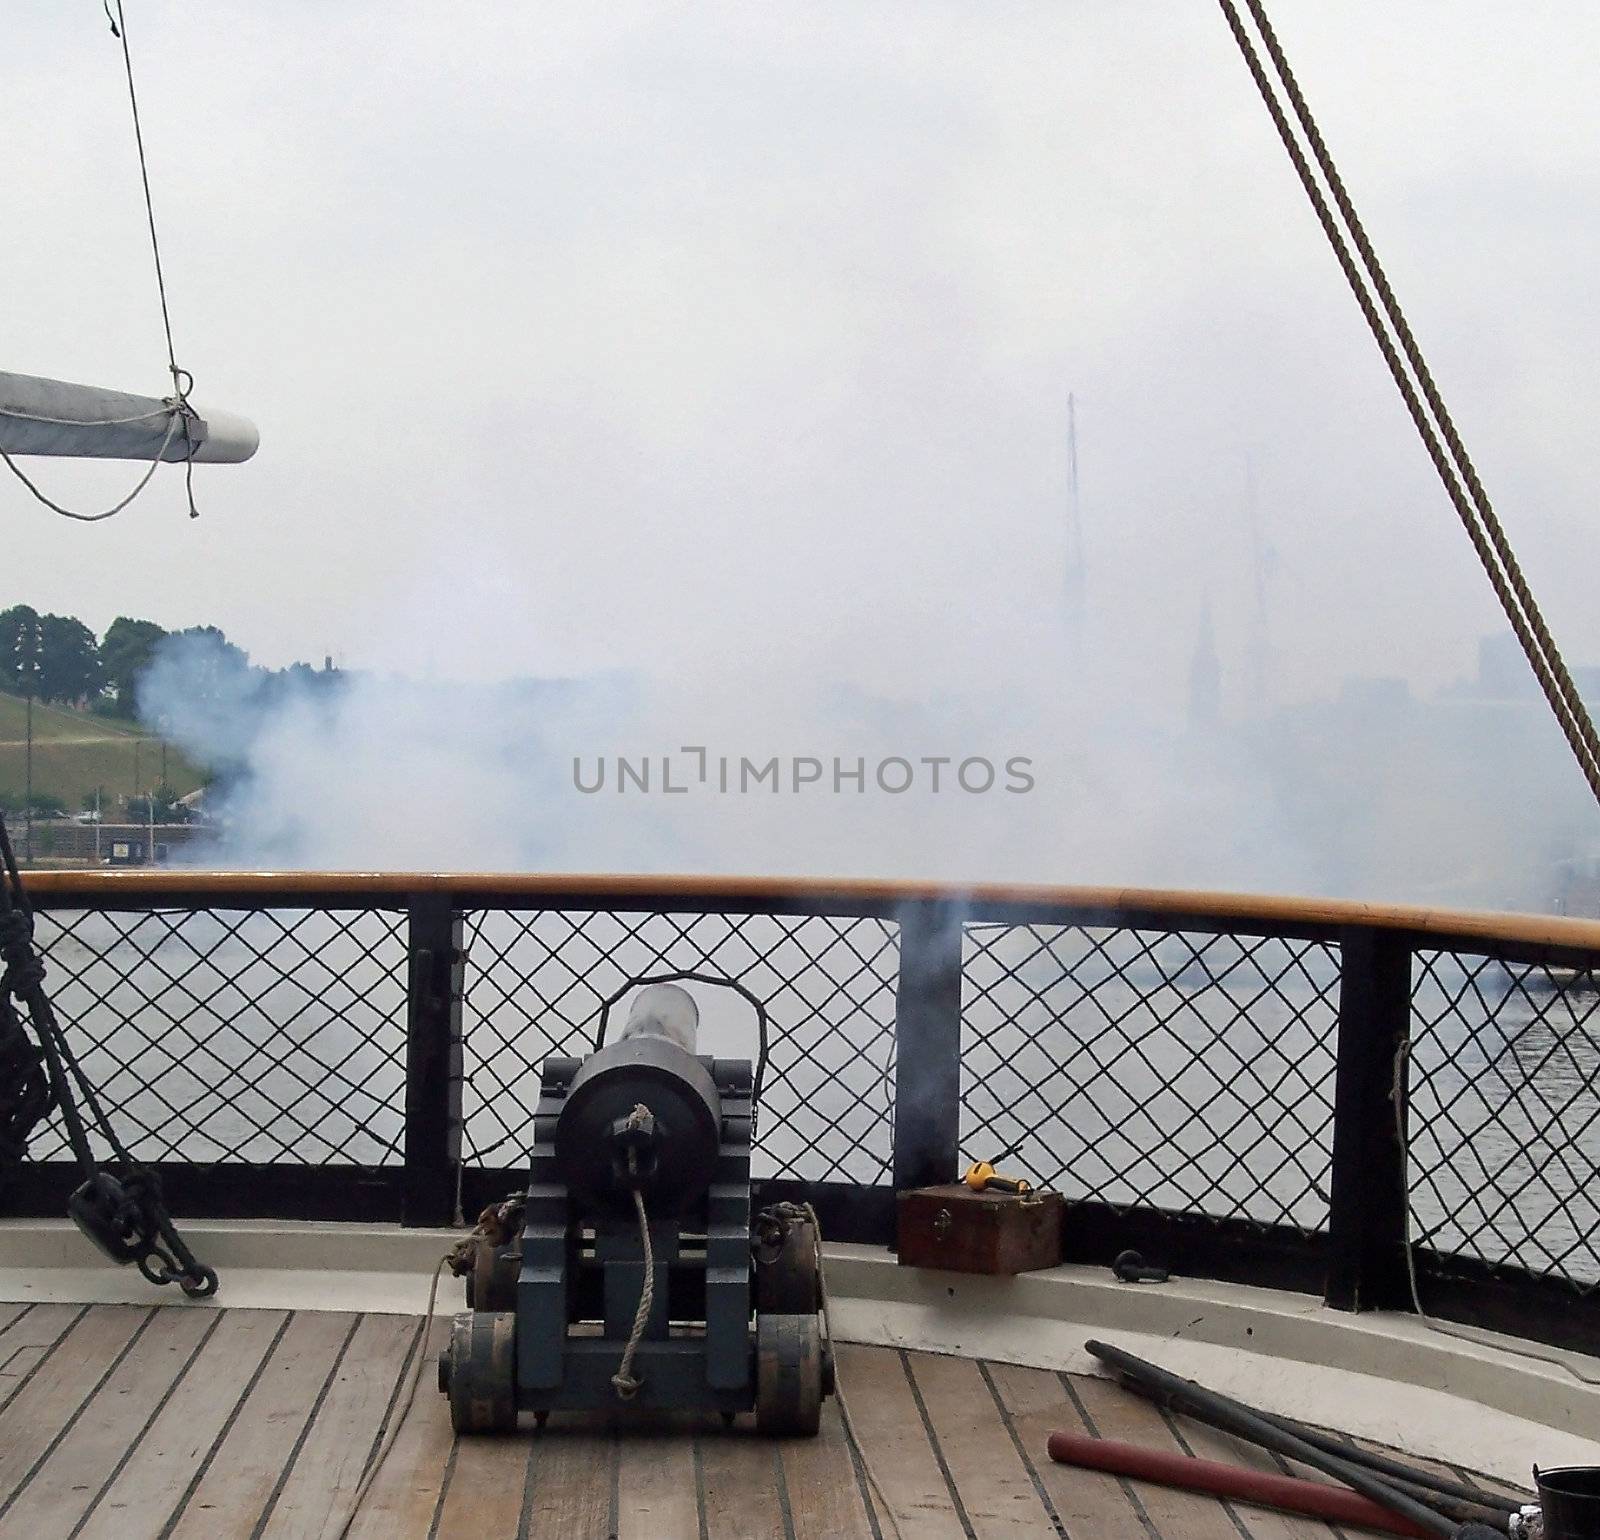 A canon is fired on the USS Constellation in Baltimore Harbor. The ship is now a museum and was in service during the mid 1800's and was used to intercept three slave trading ships and free the imprisoned slaves. It was also used to carry famine relief stores to Ireland.